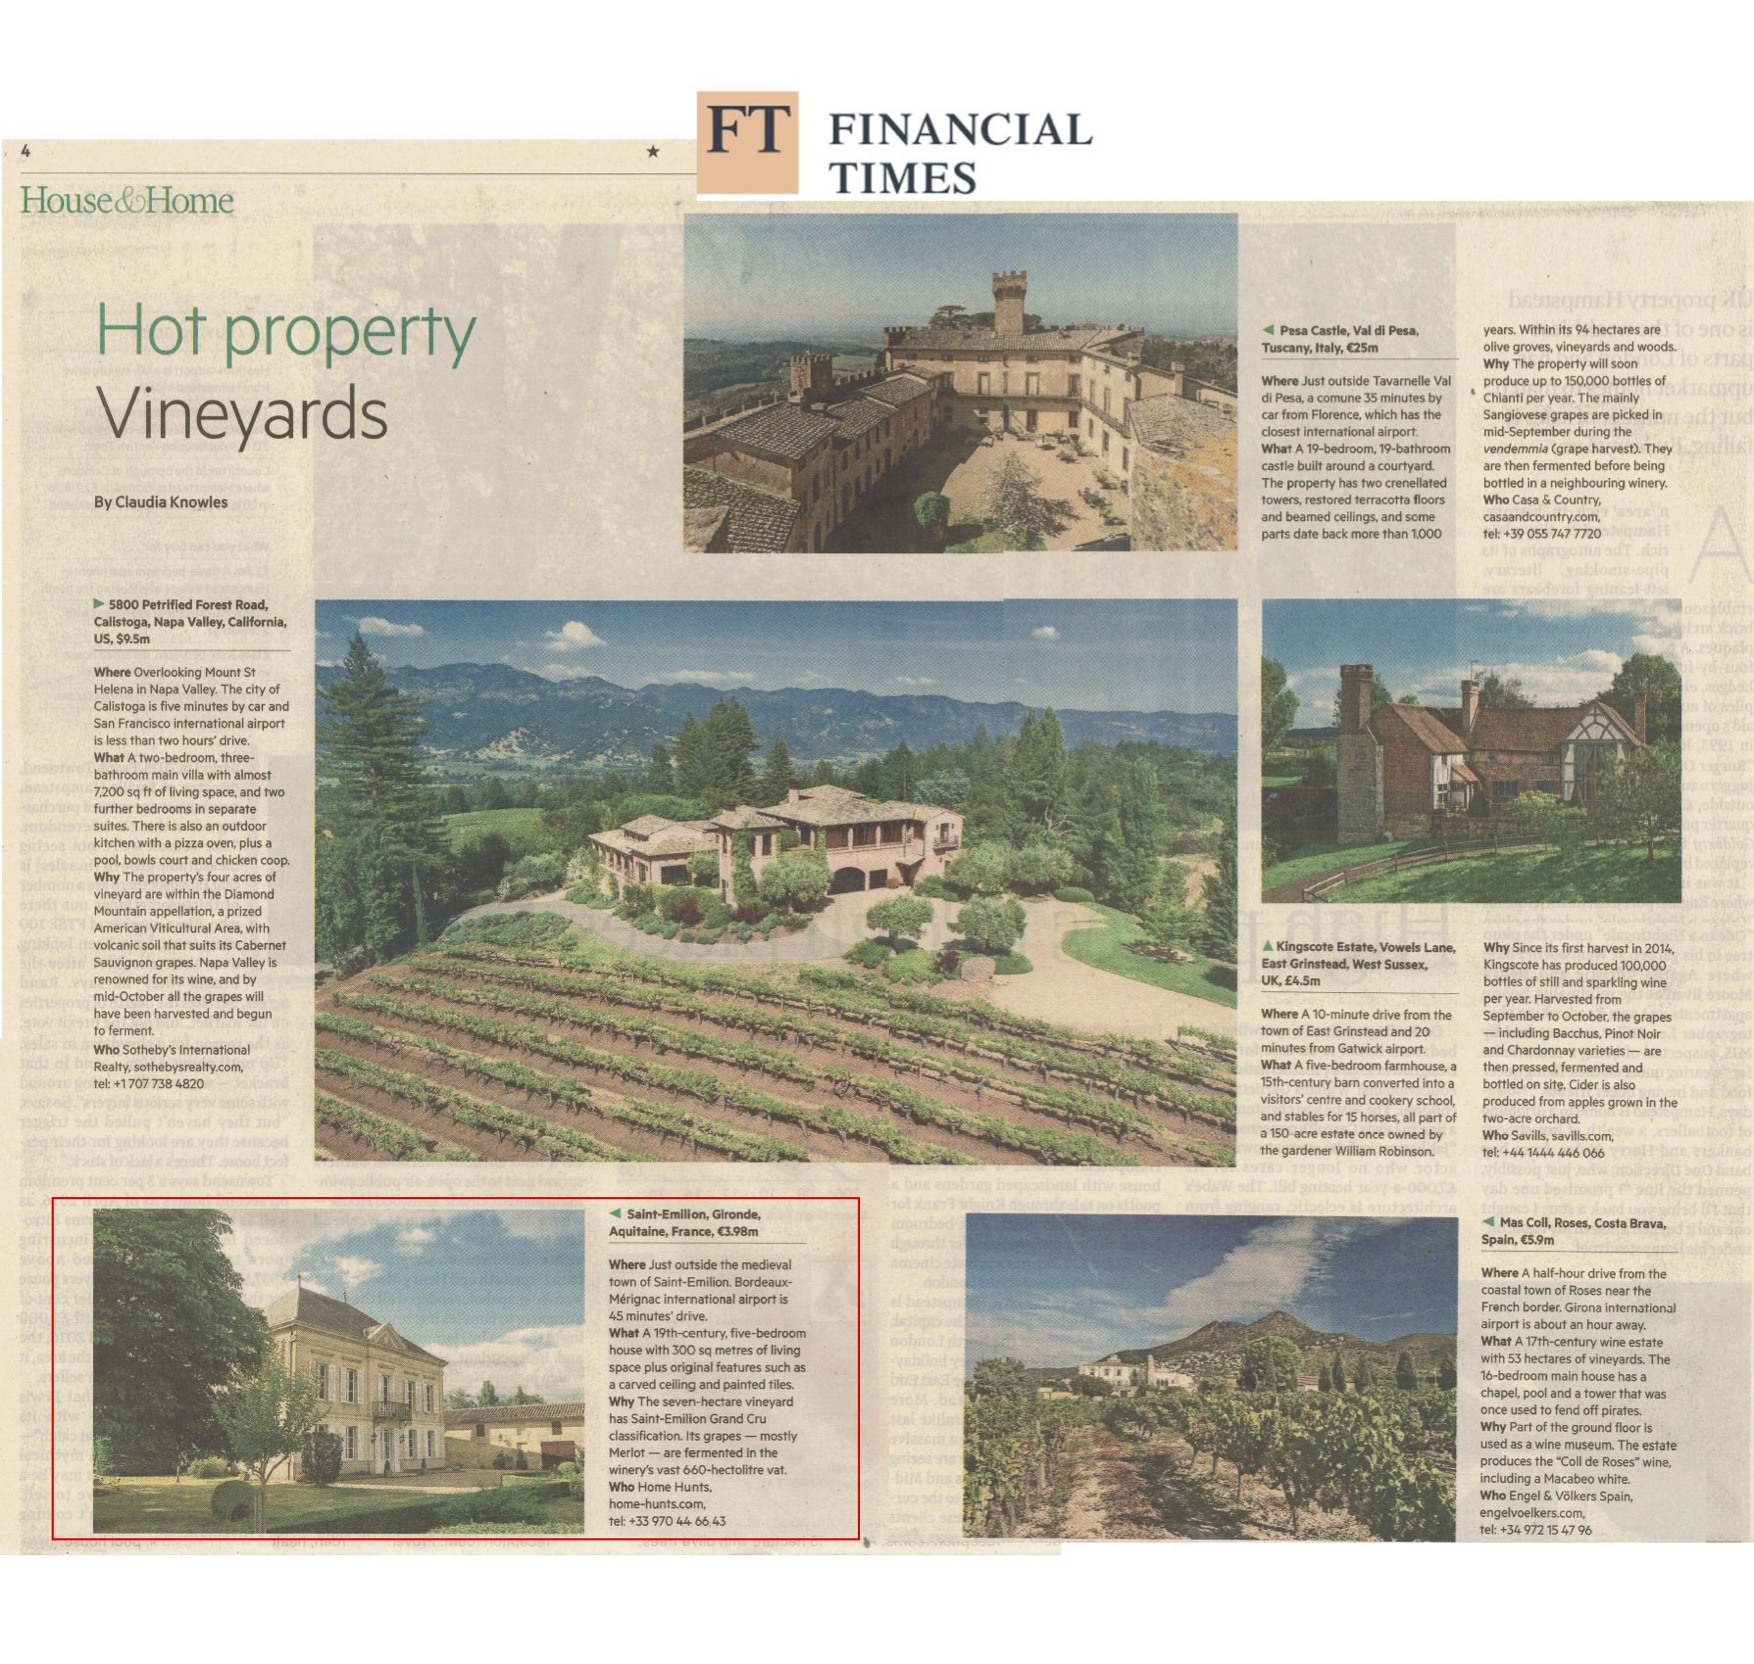 Financial Times – Hot property – 5 vineyards for sales from around the world